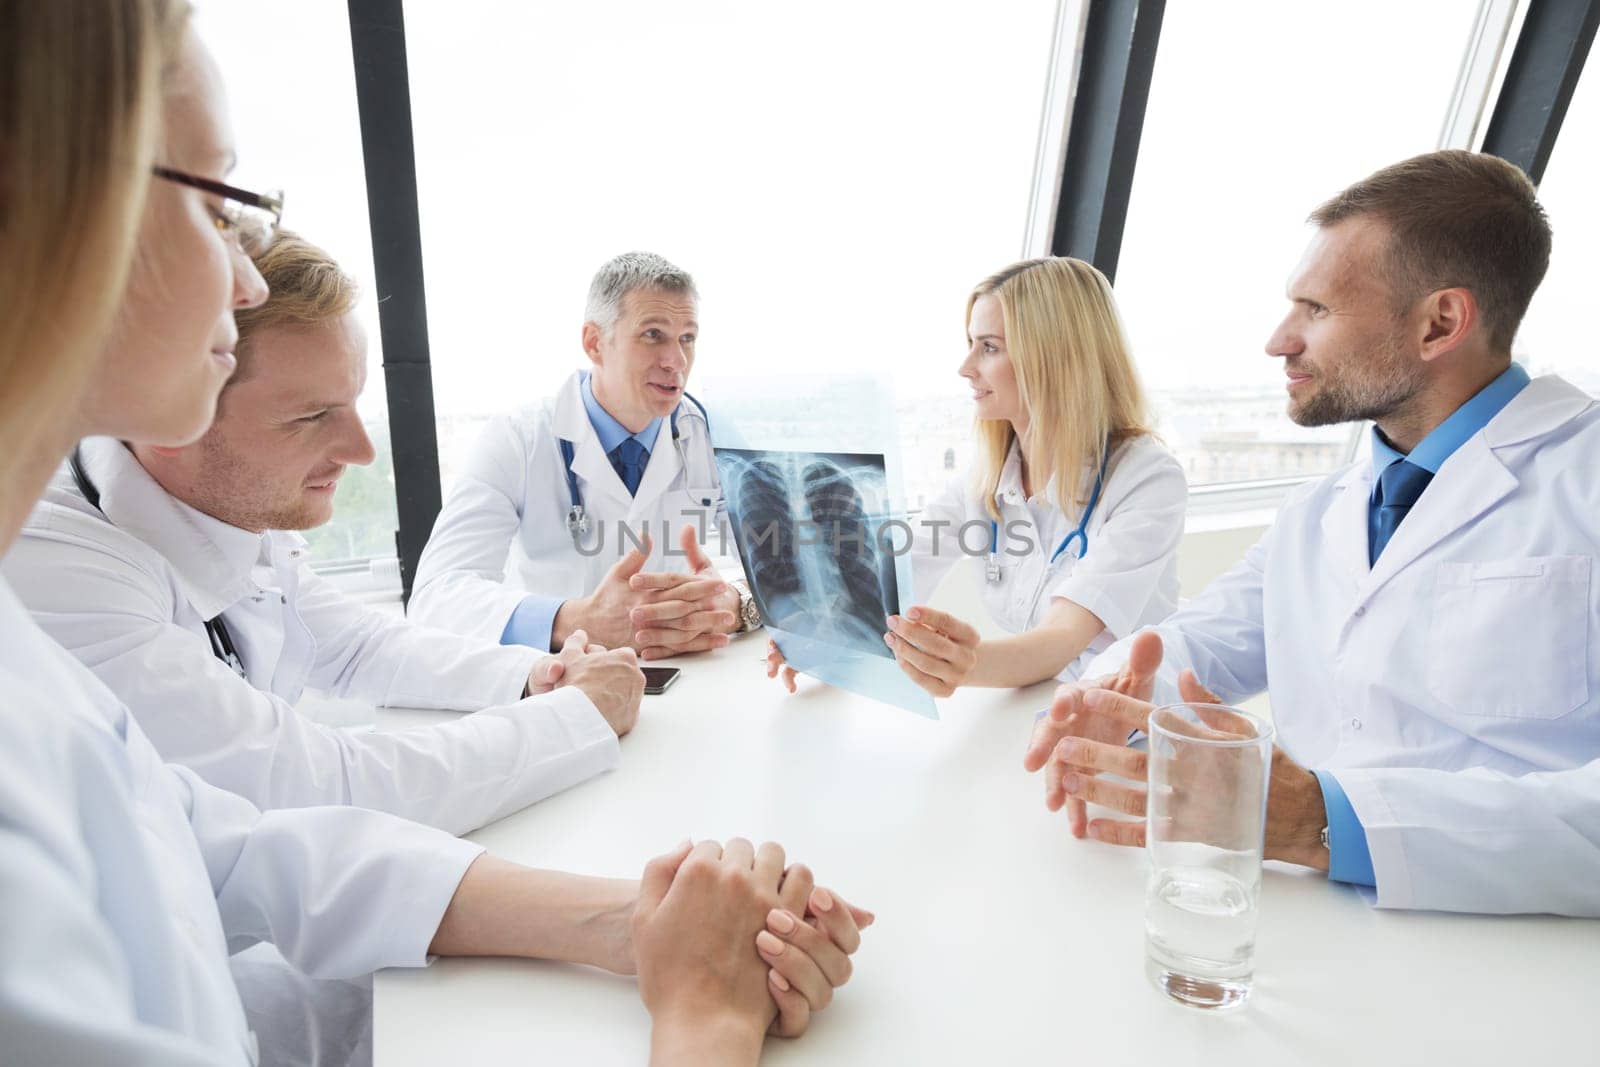 Team of experts doctors examining mri report on hospital office meeting